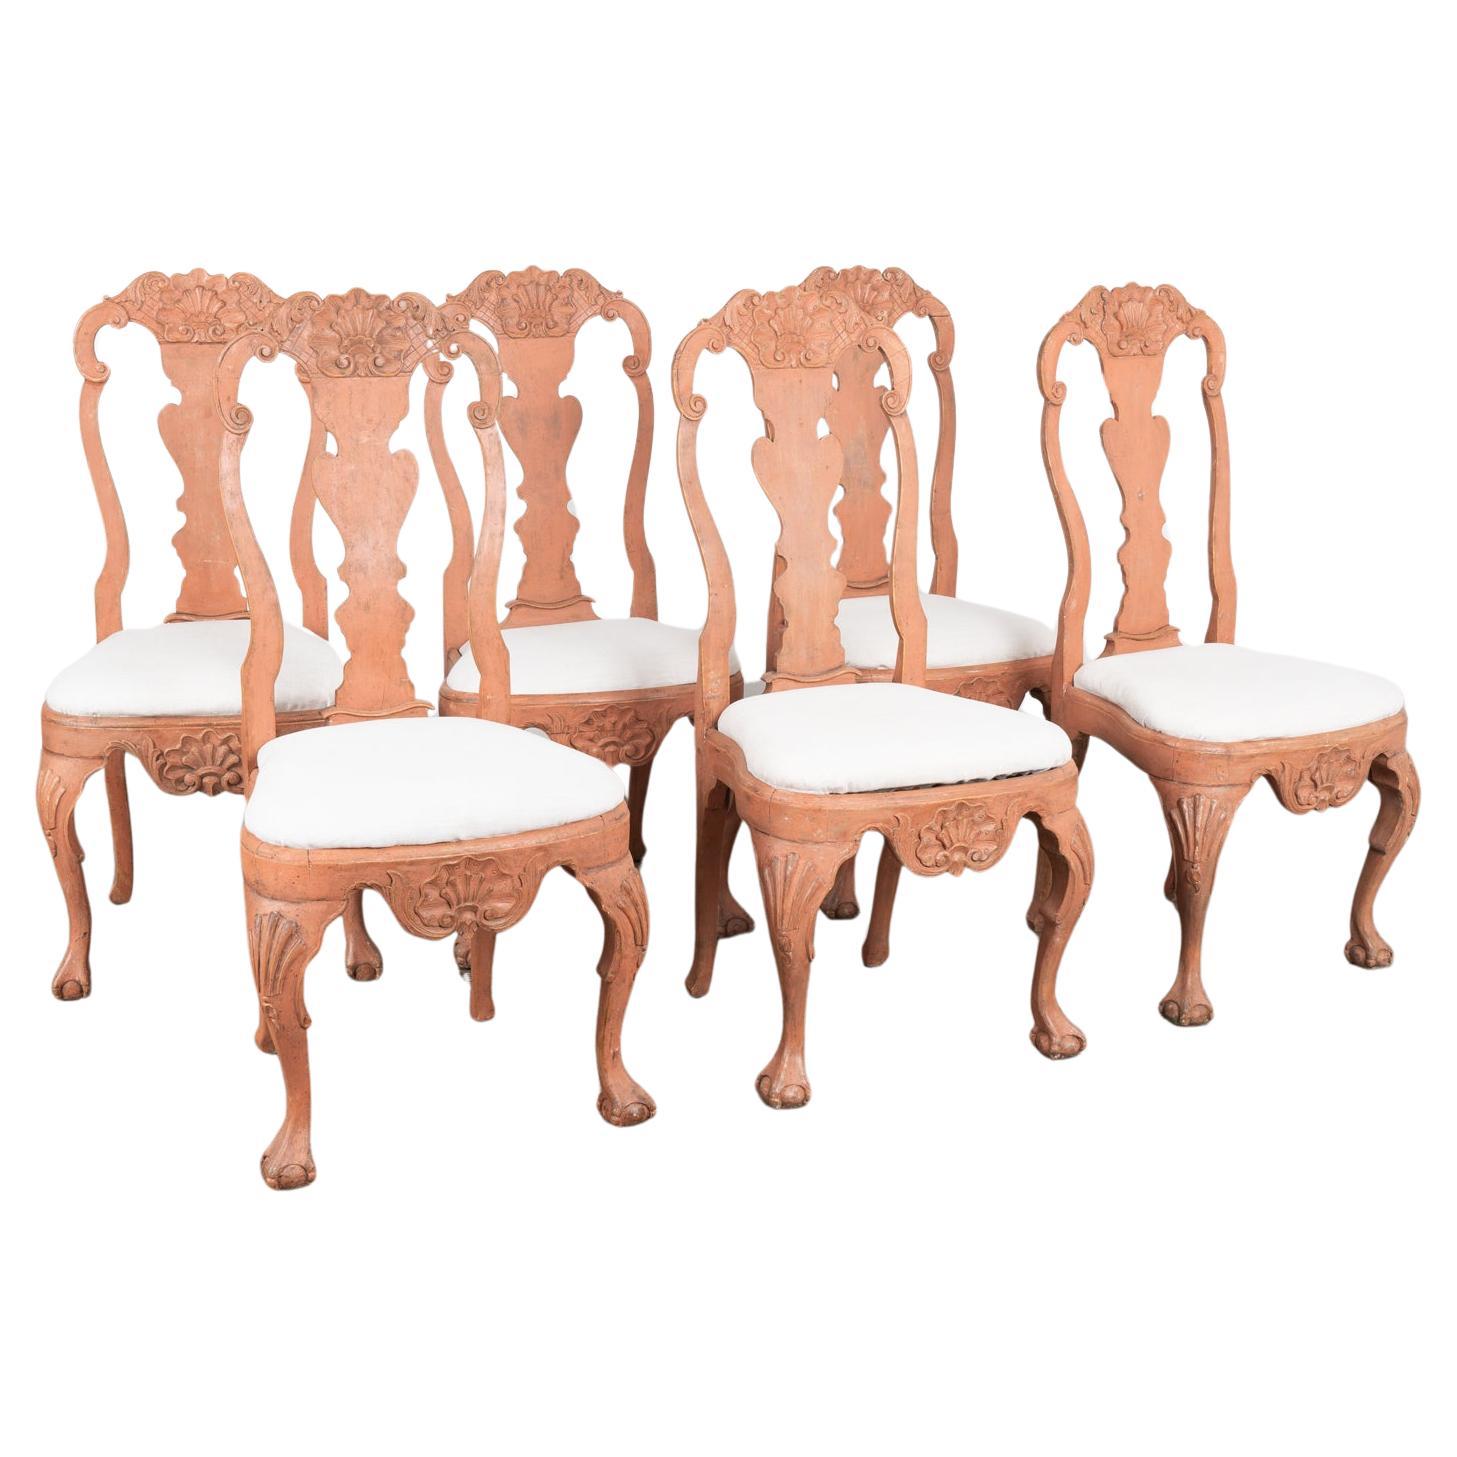 Set of 6 Rococo Dining Chairs, Norway circa 1770-1800 For Sale